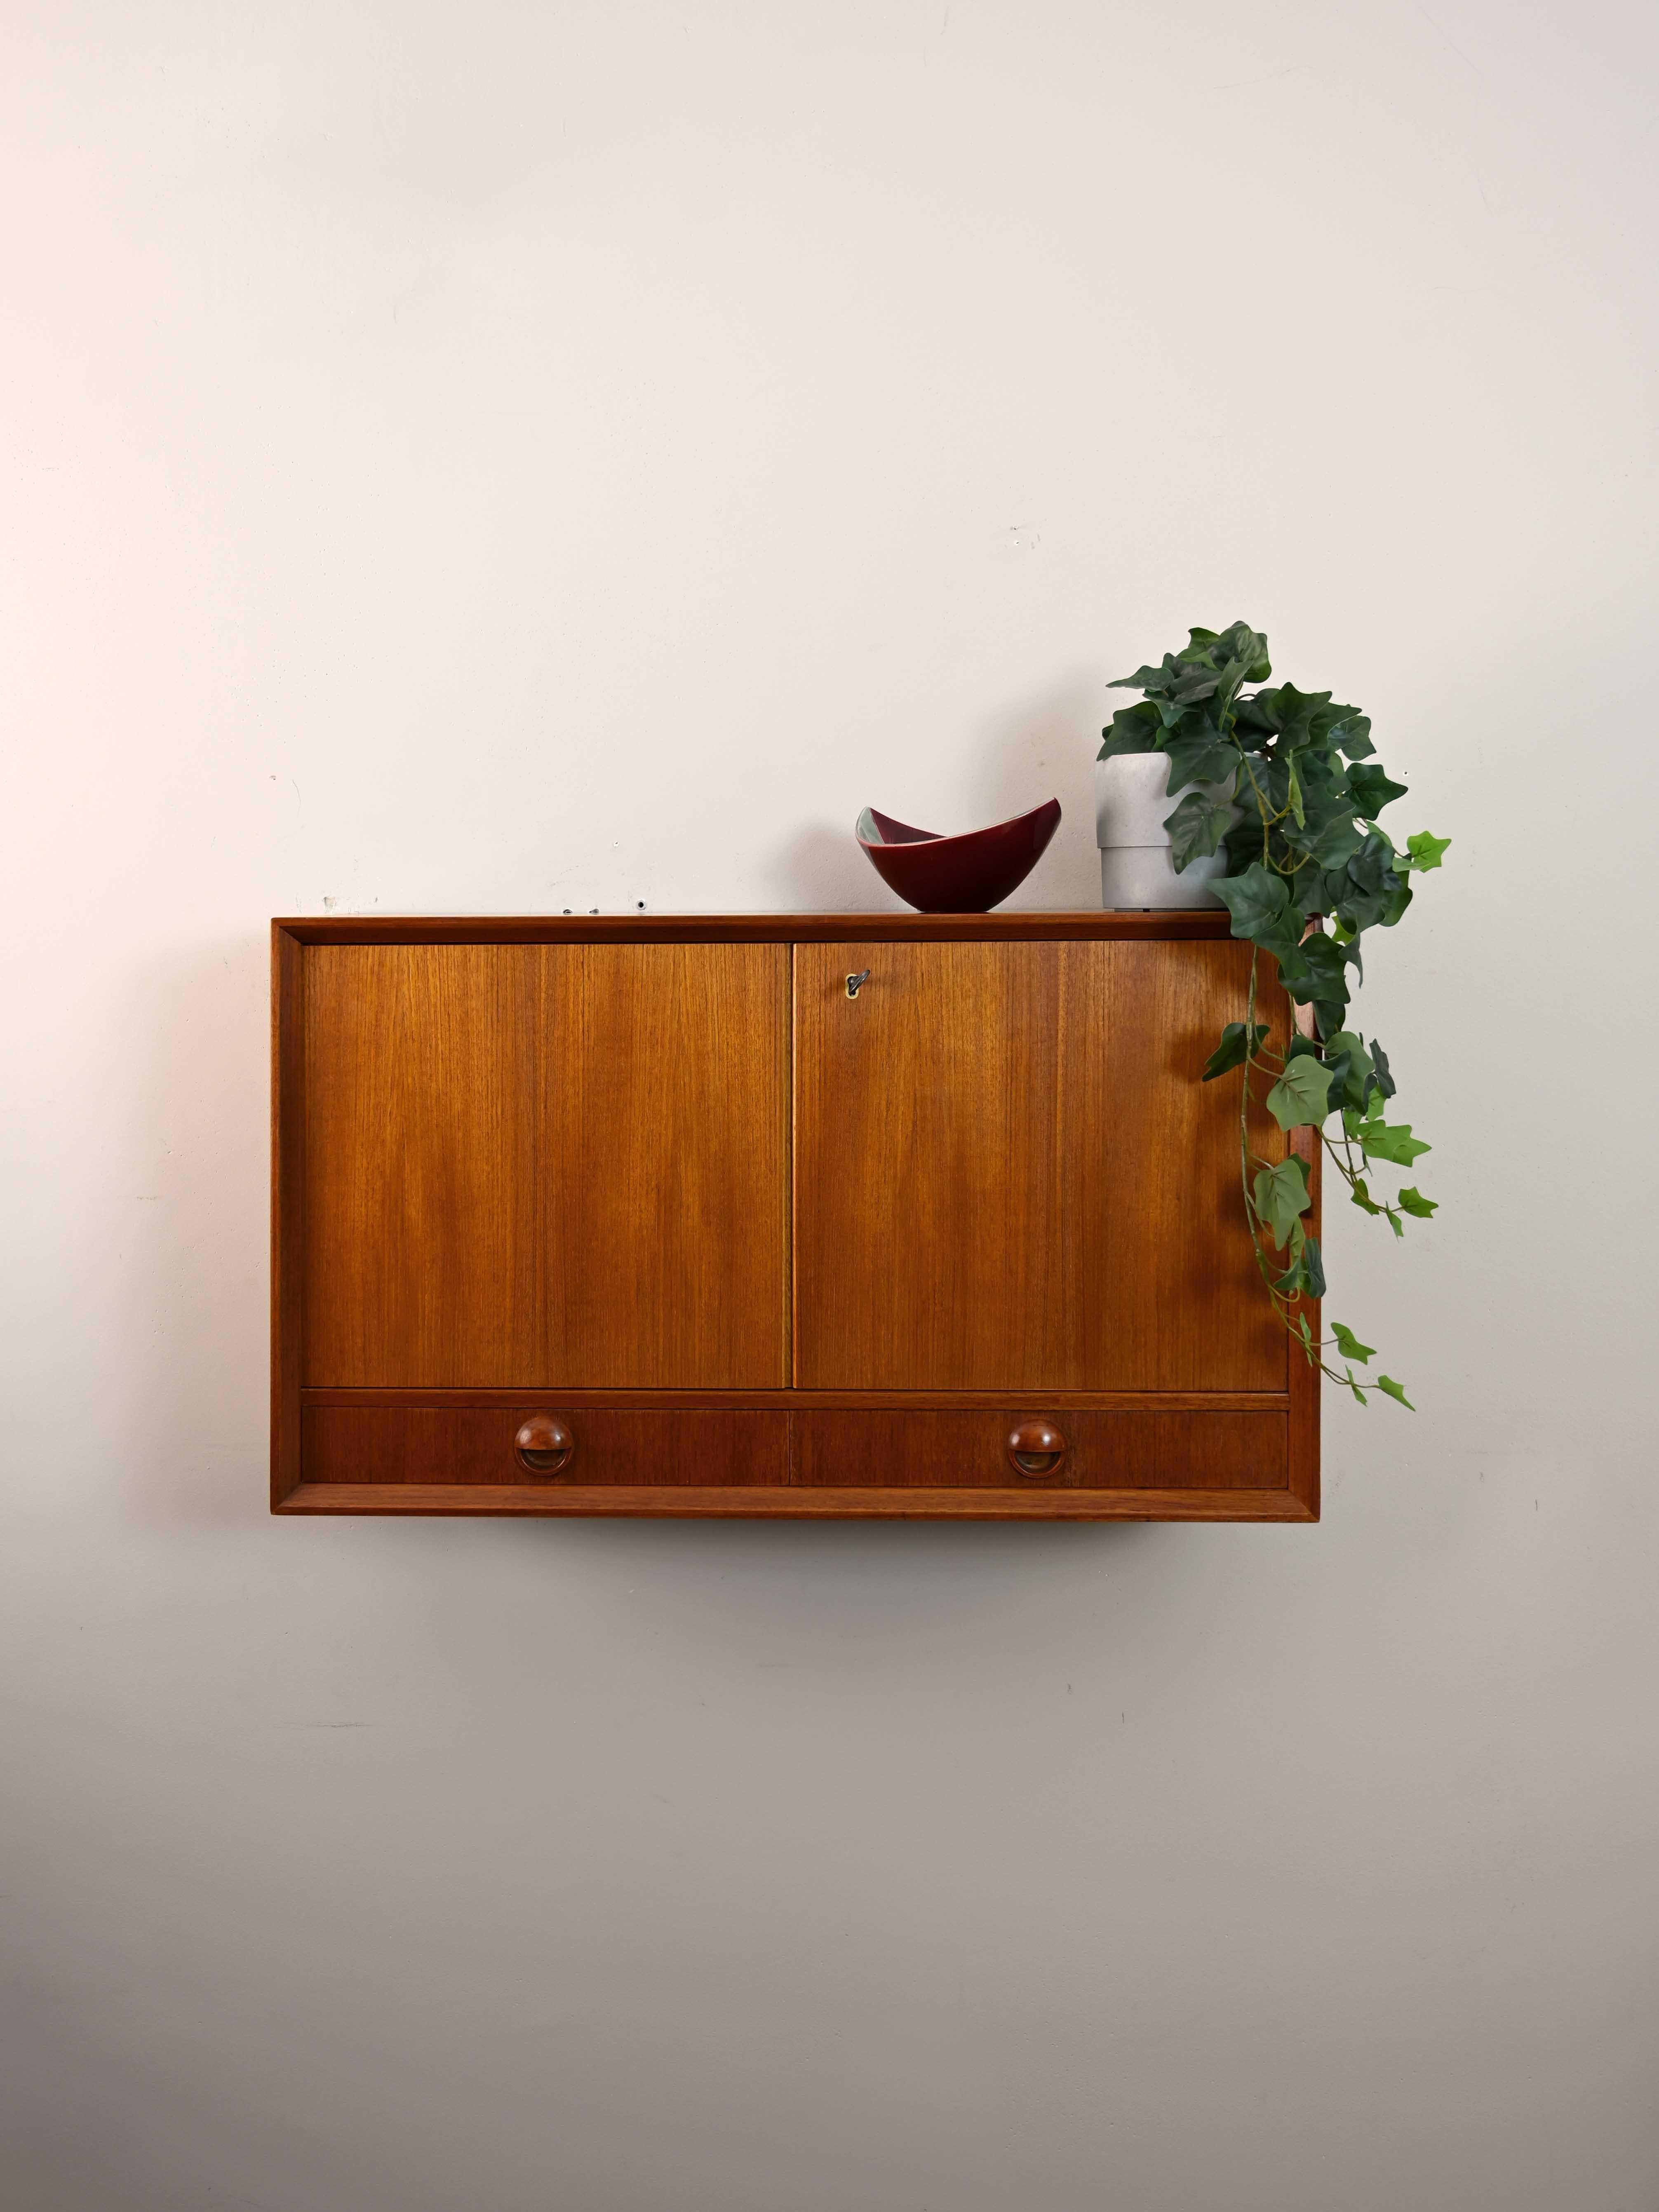 Scandinavian modernist cabinet.

A small furniture piece, ideal as a bathroom cabinet. The frame is teak with lockable hinged doors, and there are two small drawers with a carved wooden handle.

Good condition. It may show some signs of time.